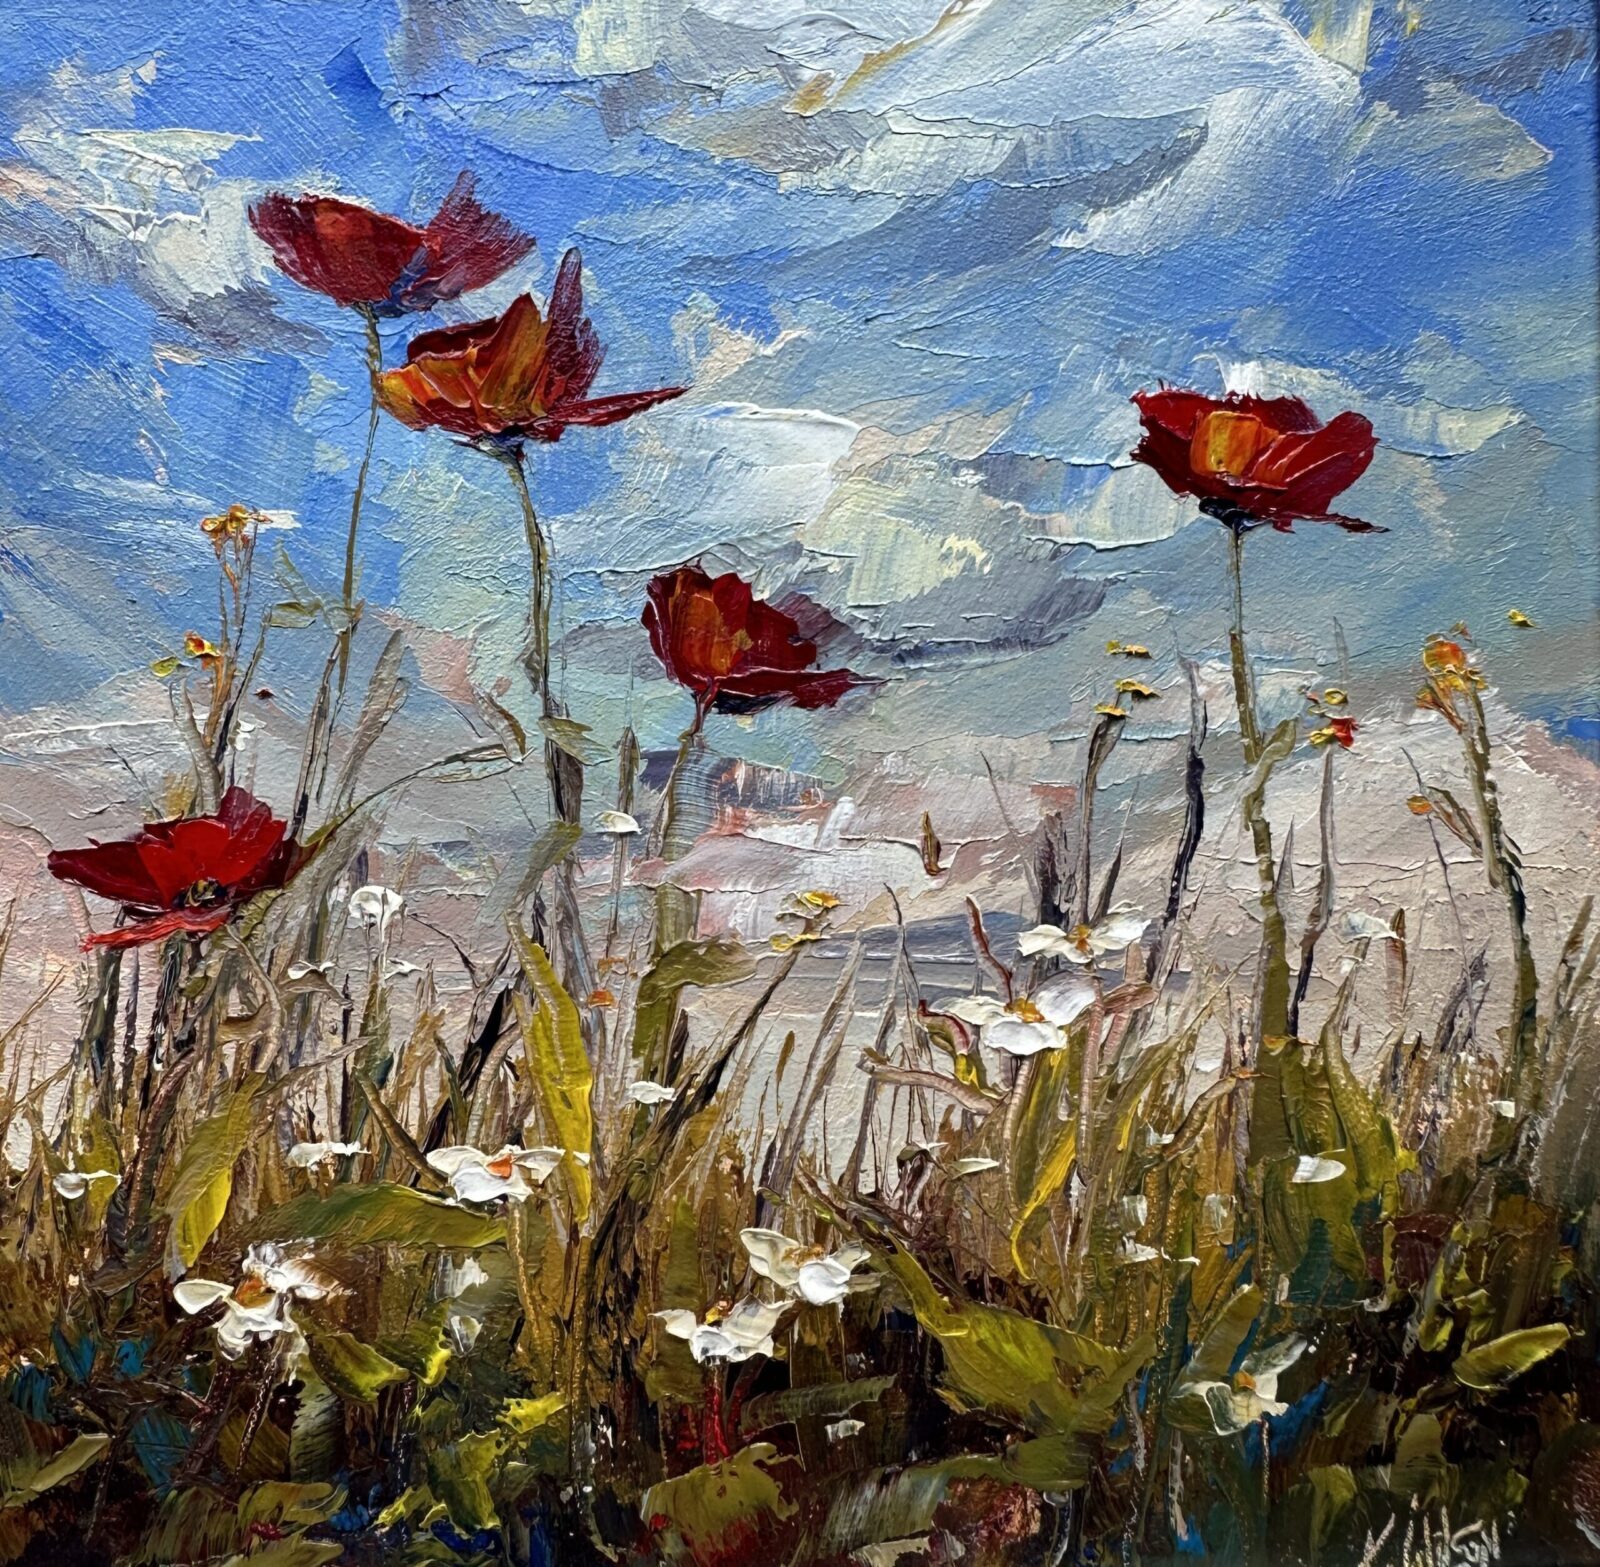 oil painting of blue skies with poppies and daisies in grass